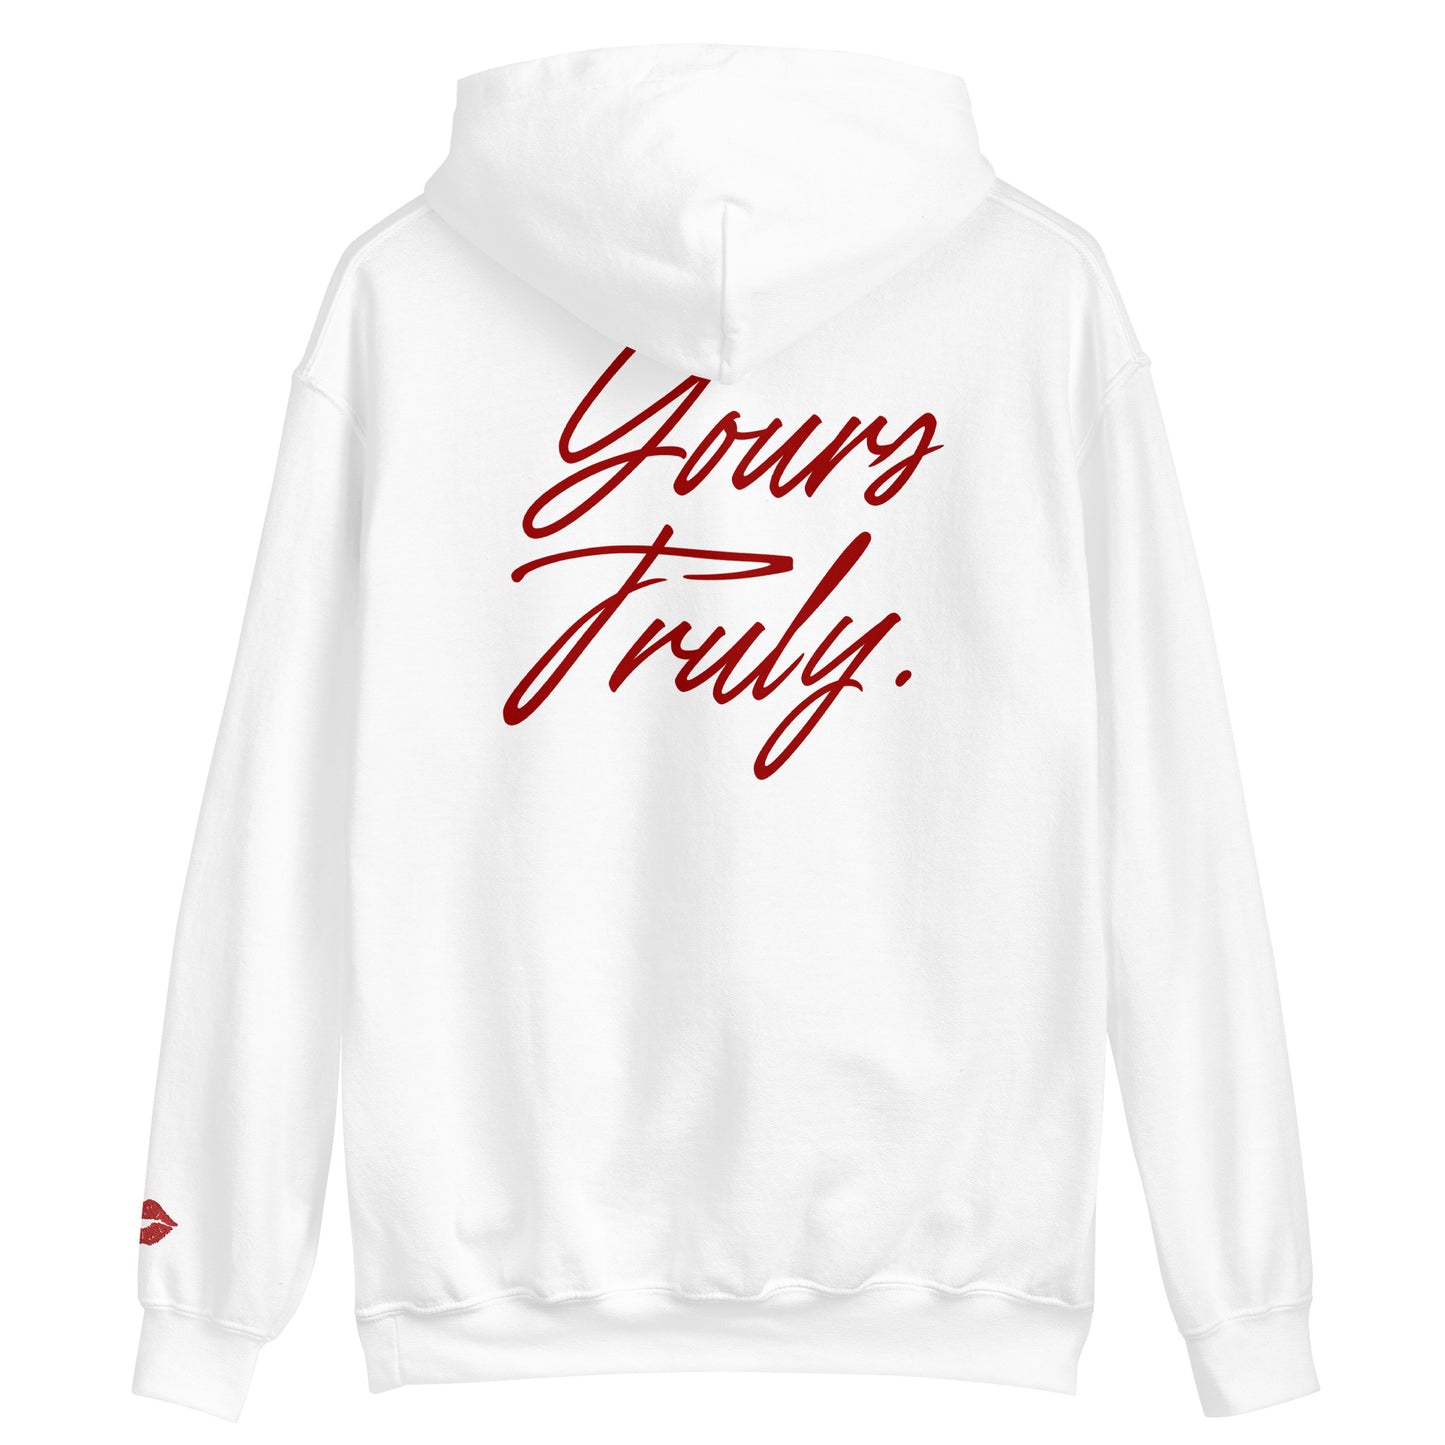 DY Yours Truly Unisex Hoodie